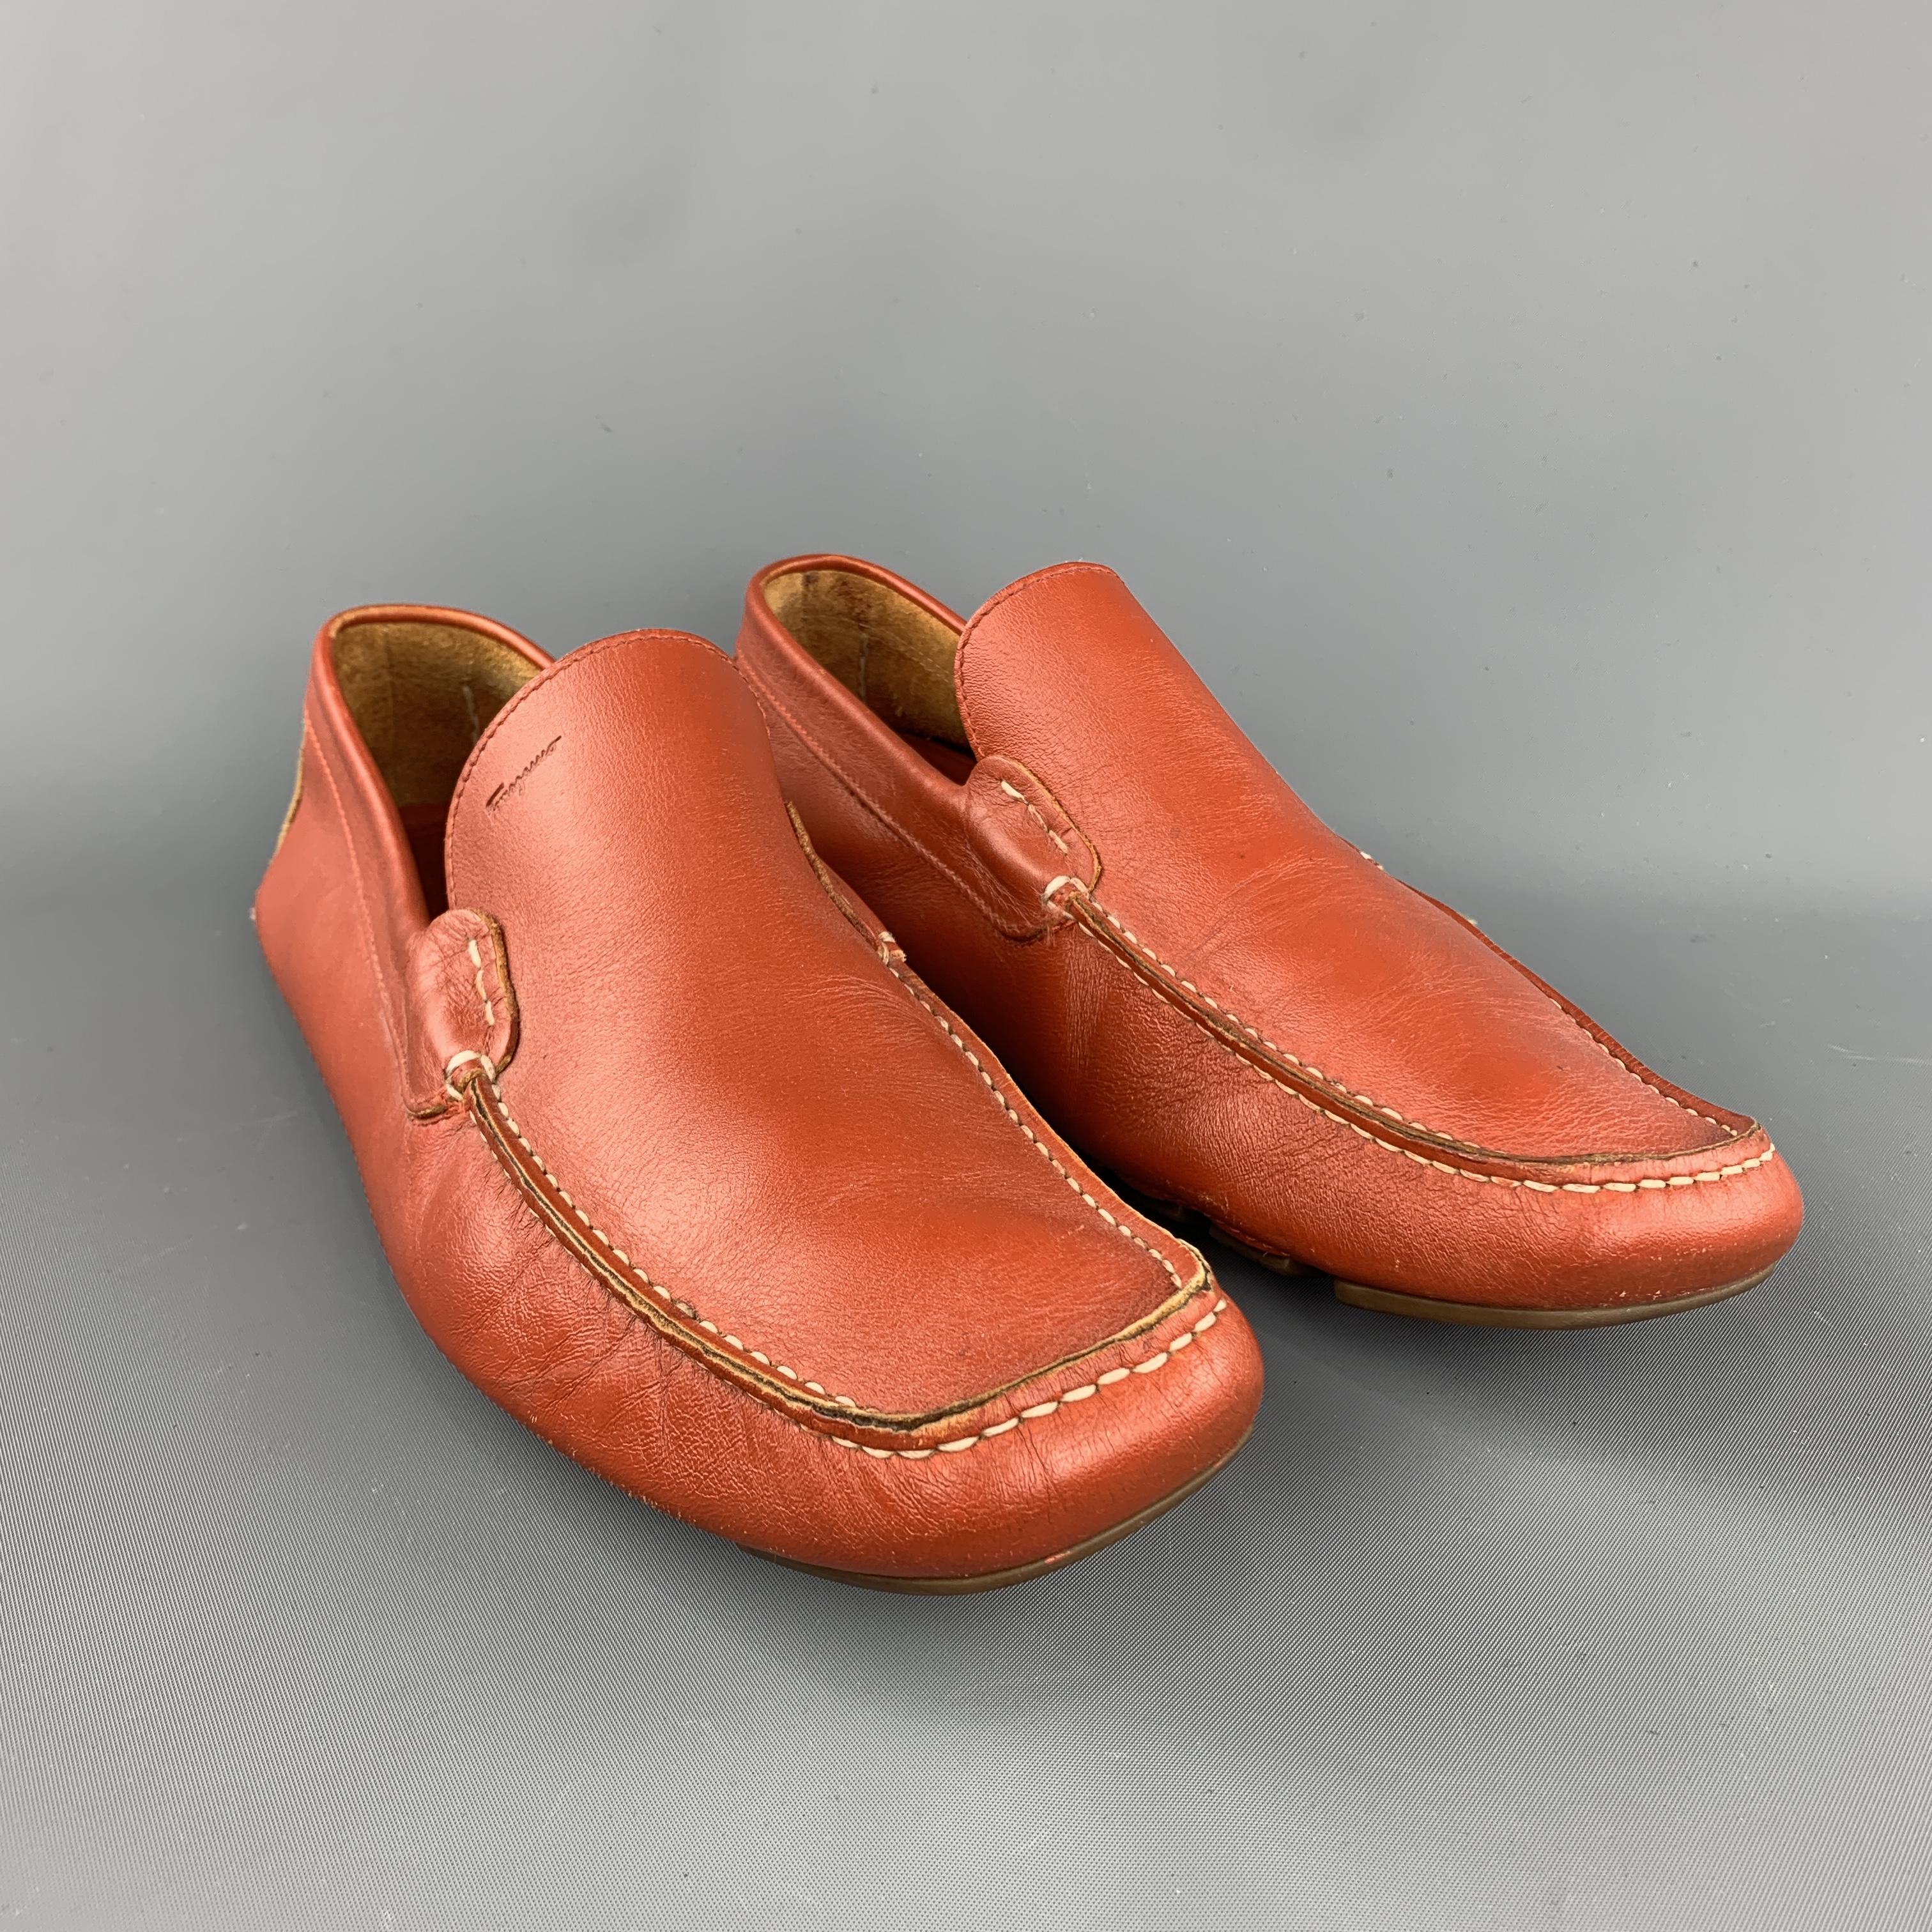 SALVATORE FERRAGAMO loafer comes in a brick leather featuring a drivers style and a pebbled rubber sole. Made in Italy.
 
Excellent Pre-Owned Condition.
Marked: 10.5
 
Outsole: 12.5 in. x 4.5 in.